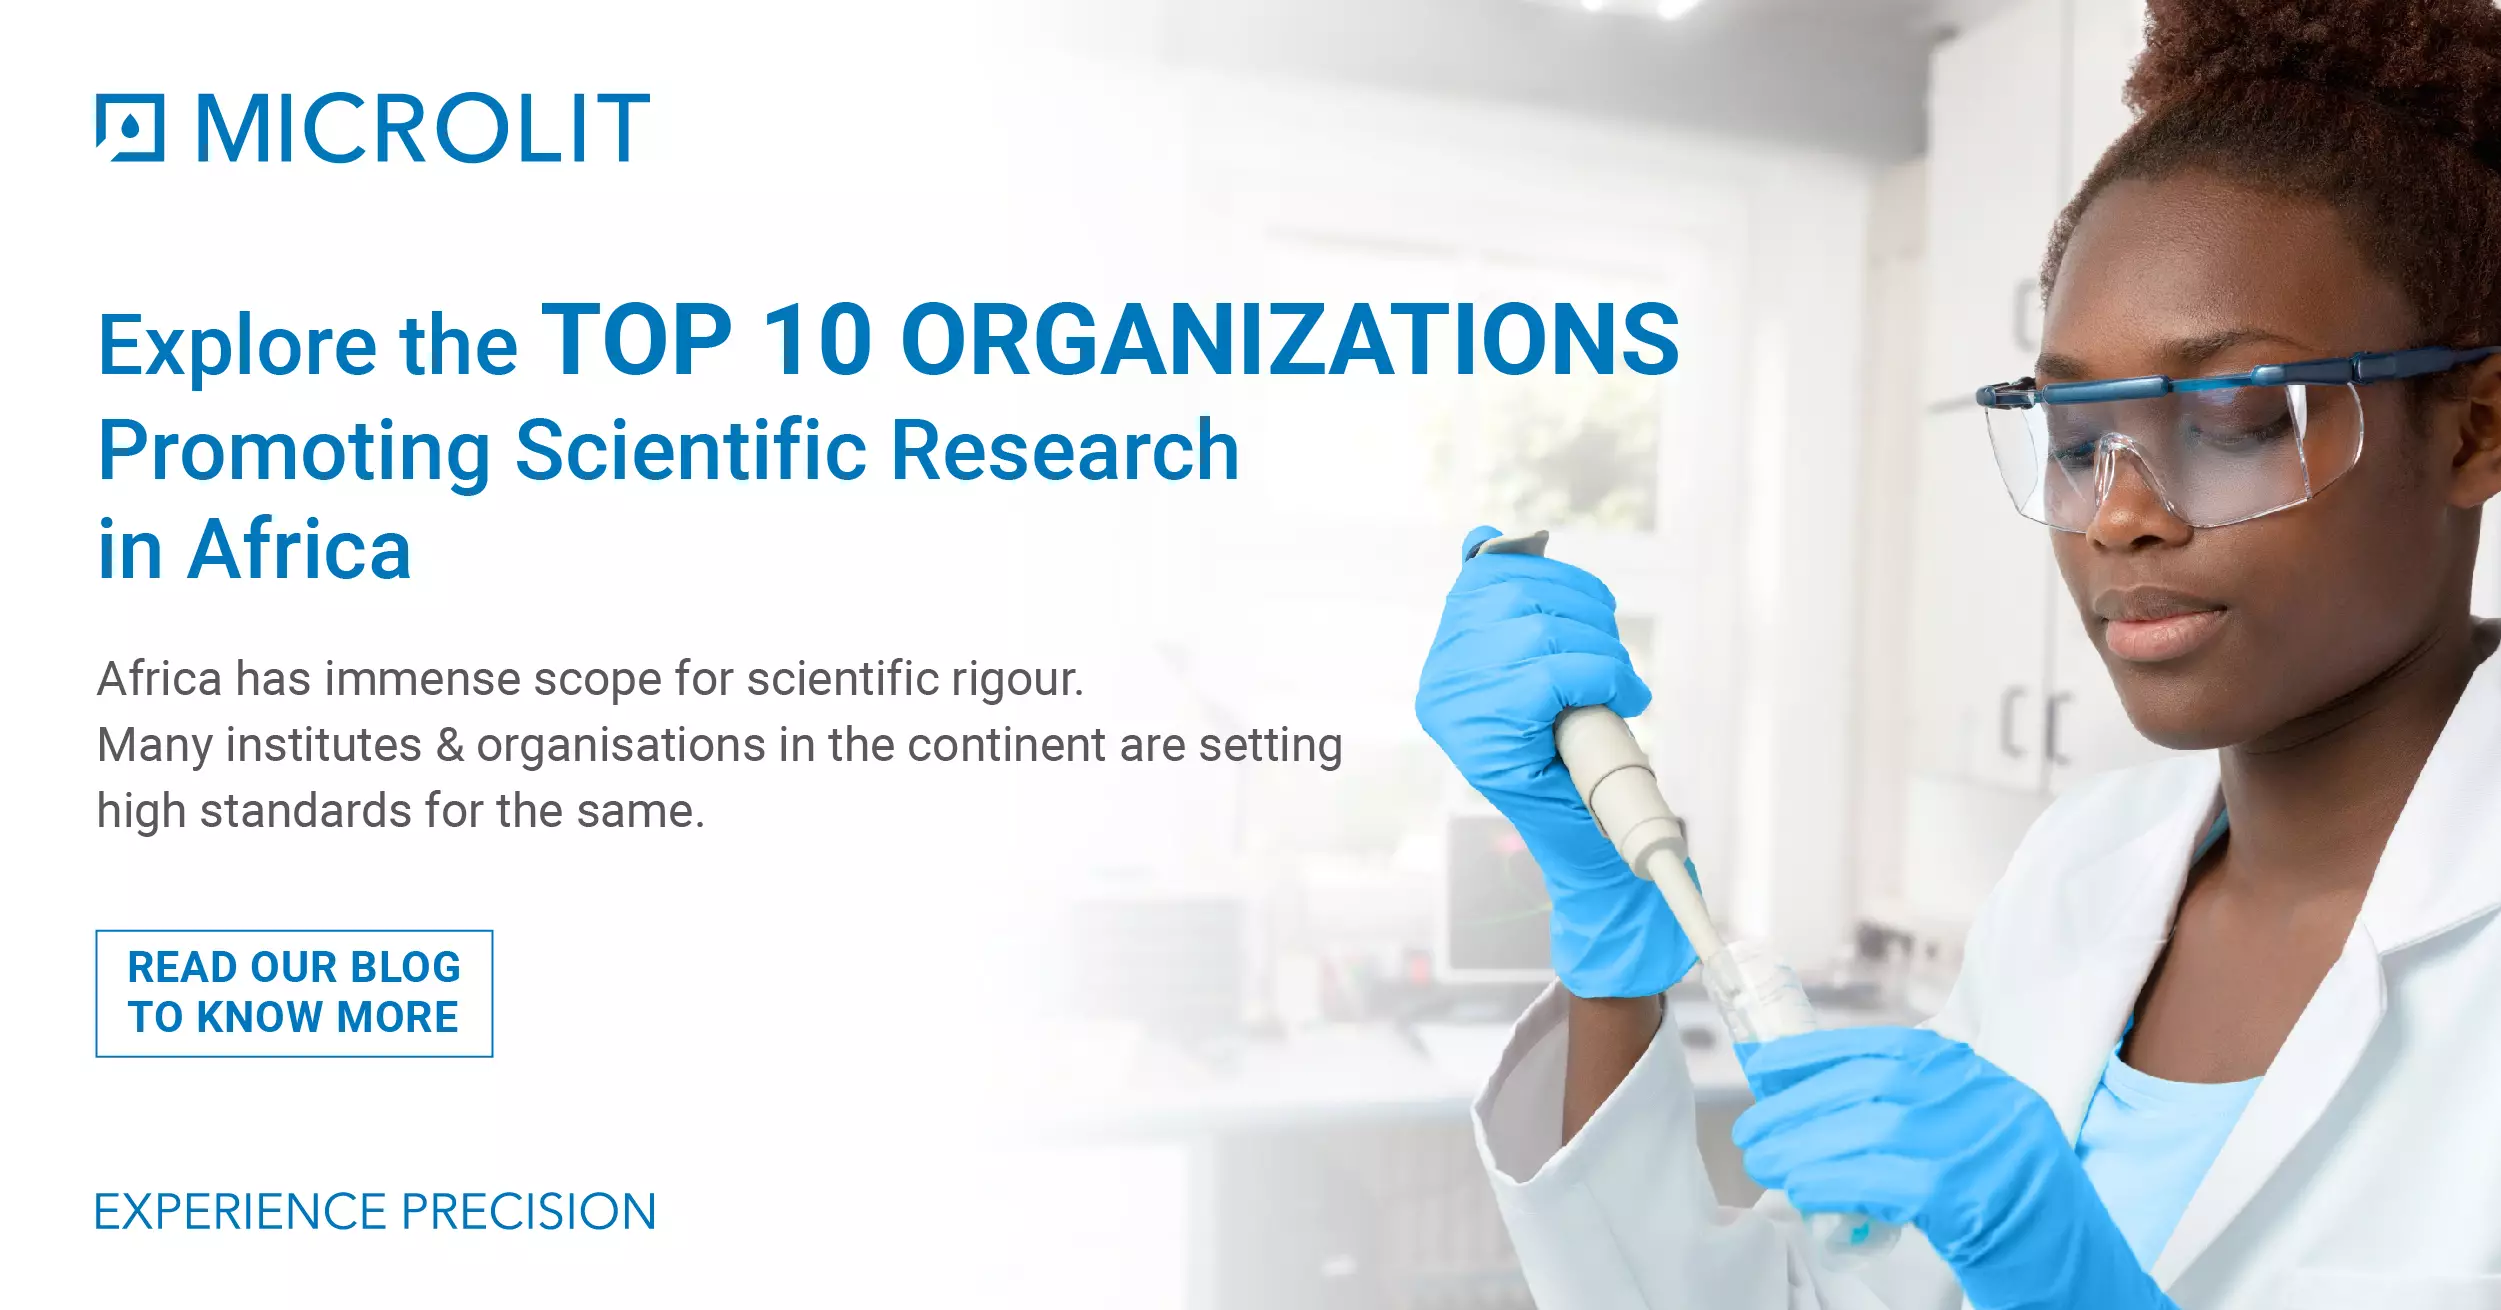 Top 10 Organizations Promoting Scientific Research in Africa